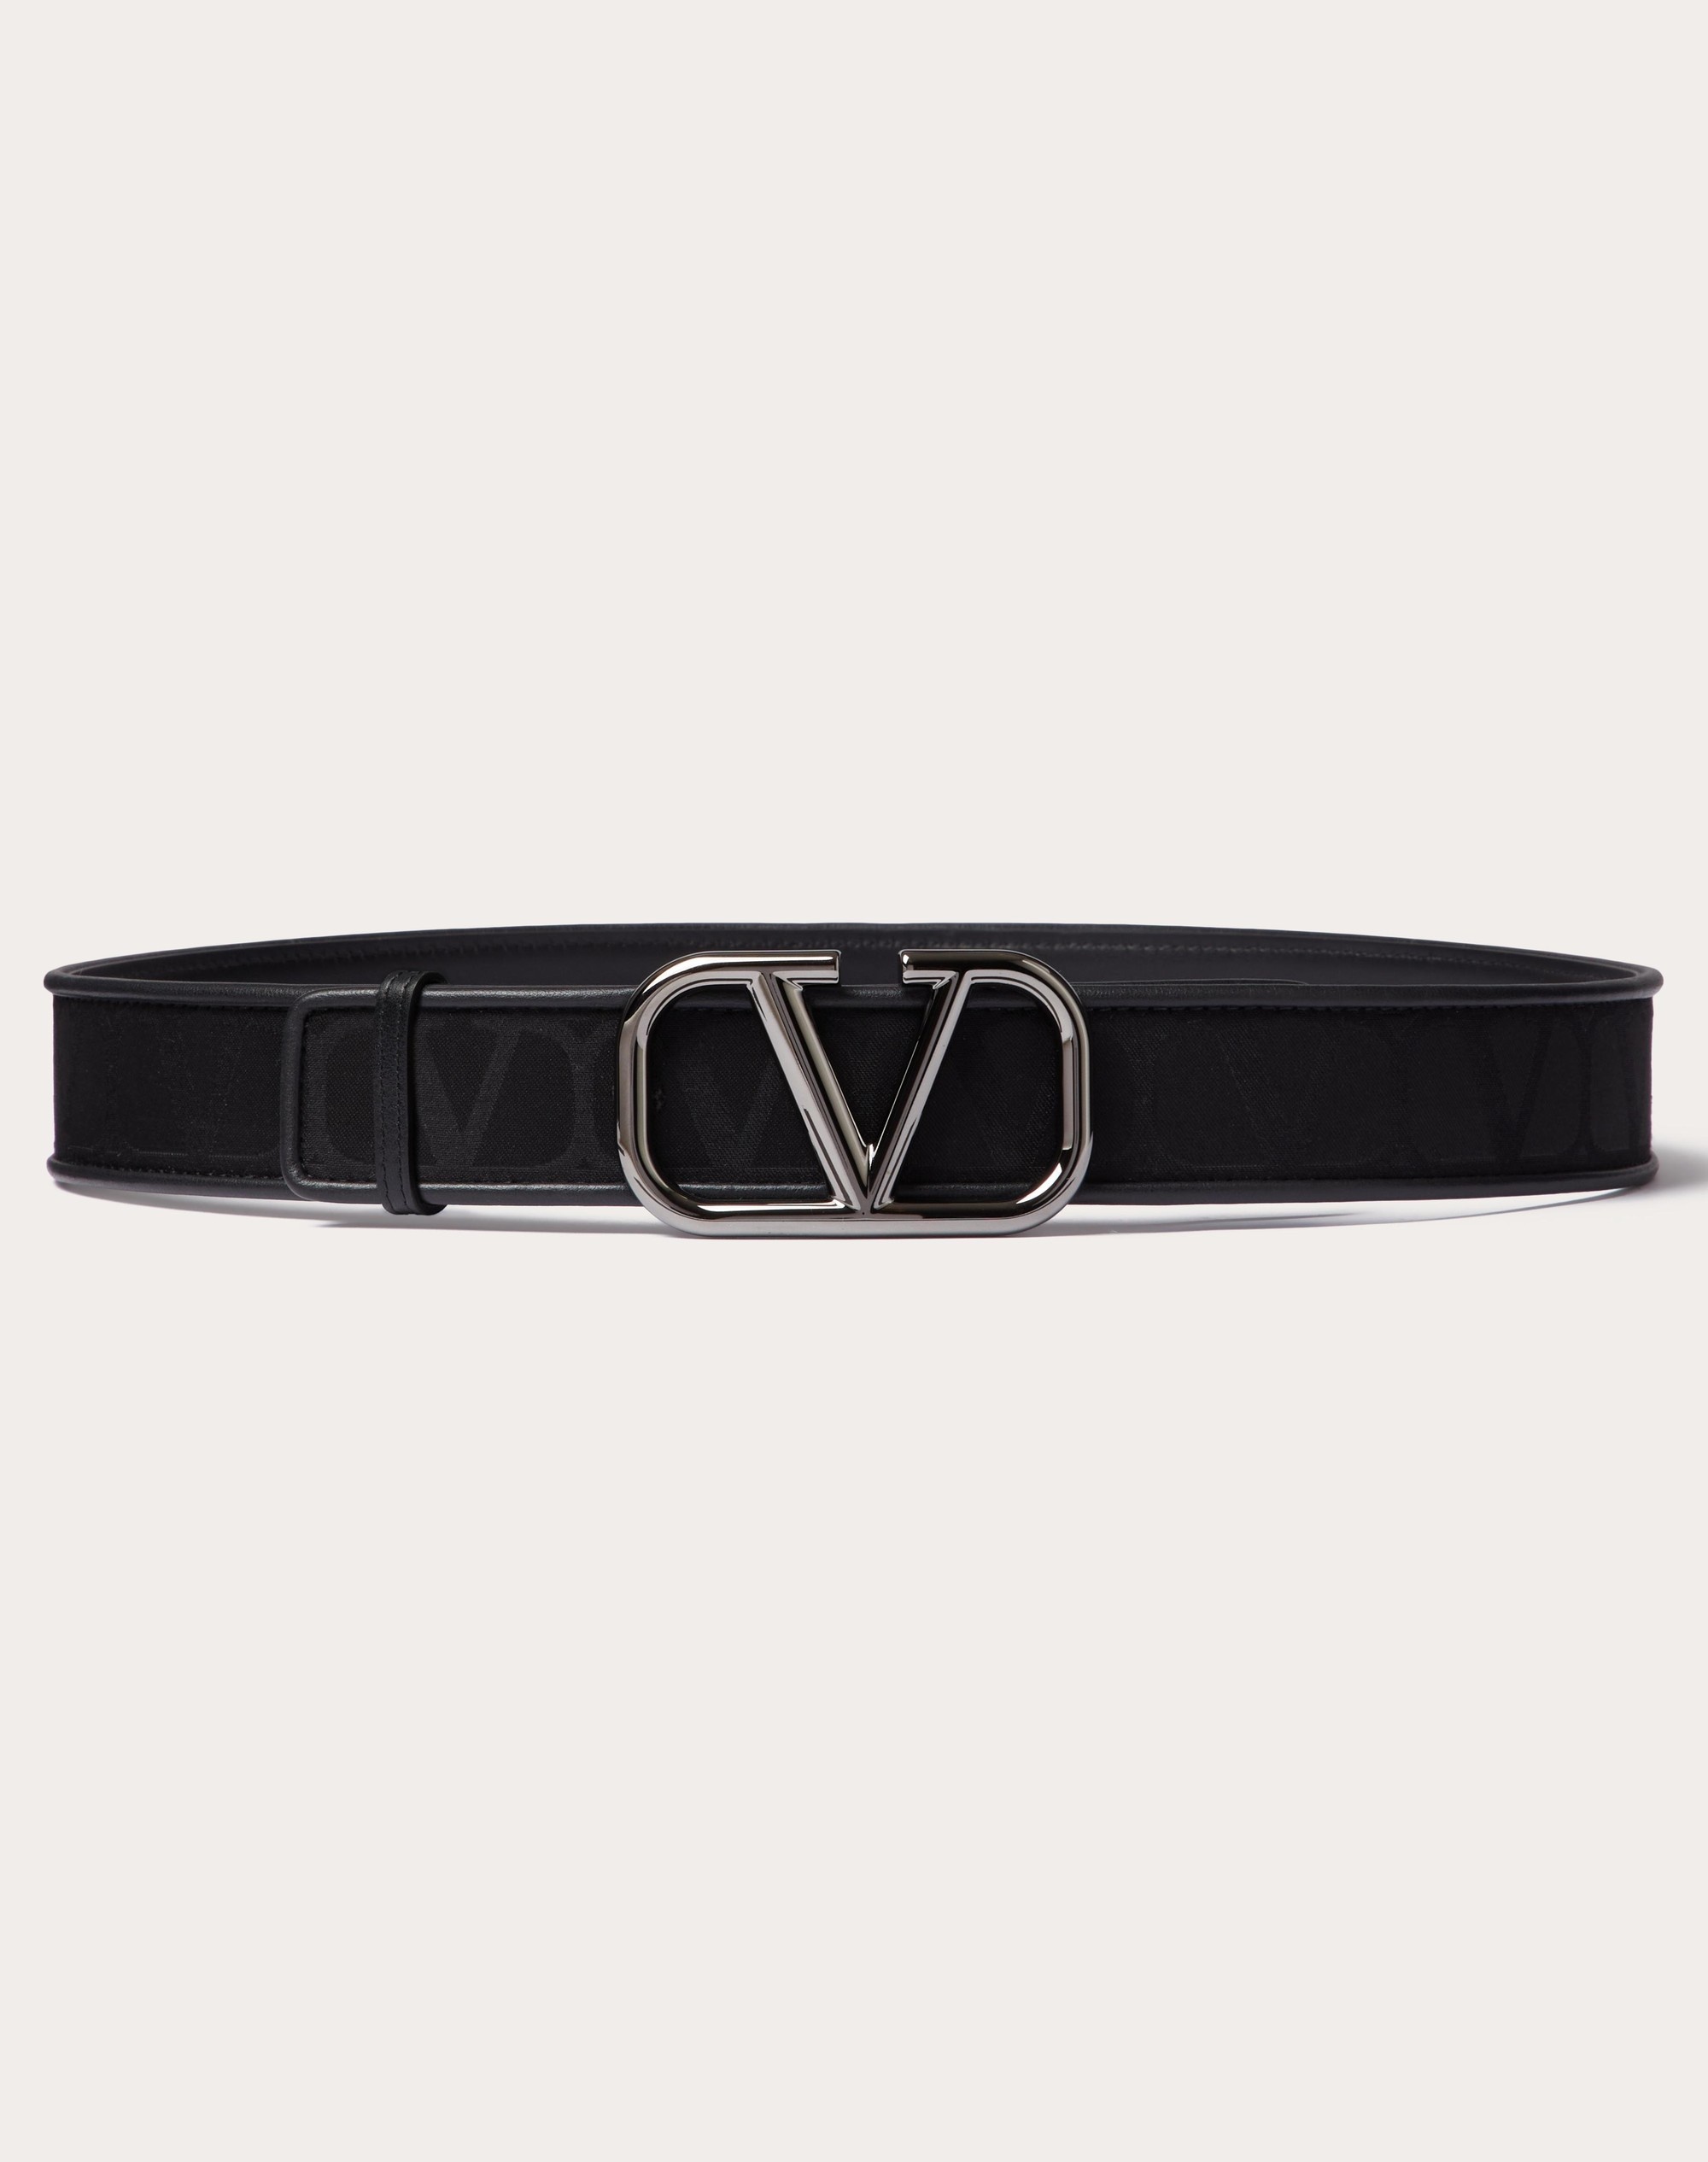 TOILE ICONOGRAPHE BELT IN TECHNICAL FABRIC WITH LEATHER DETAILS - 1